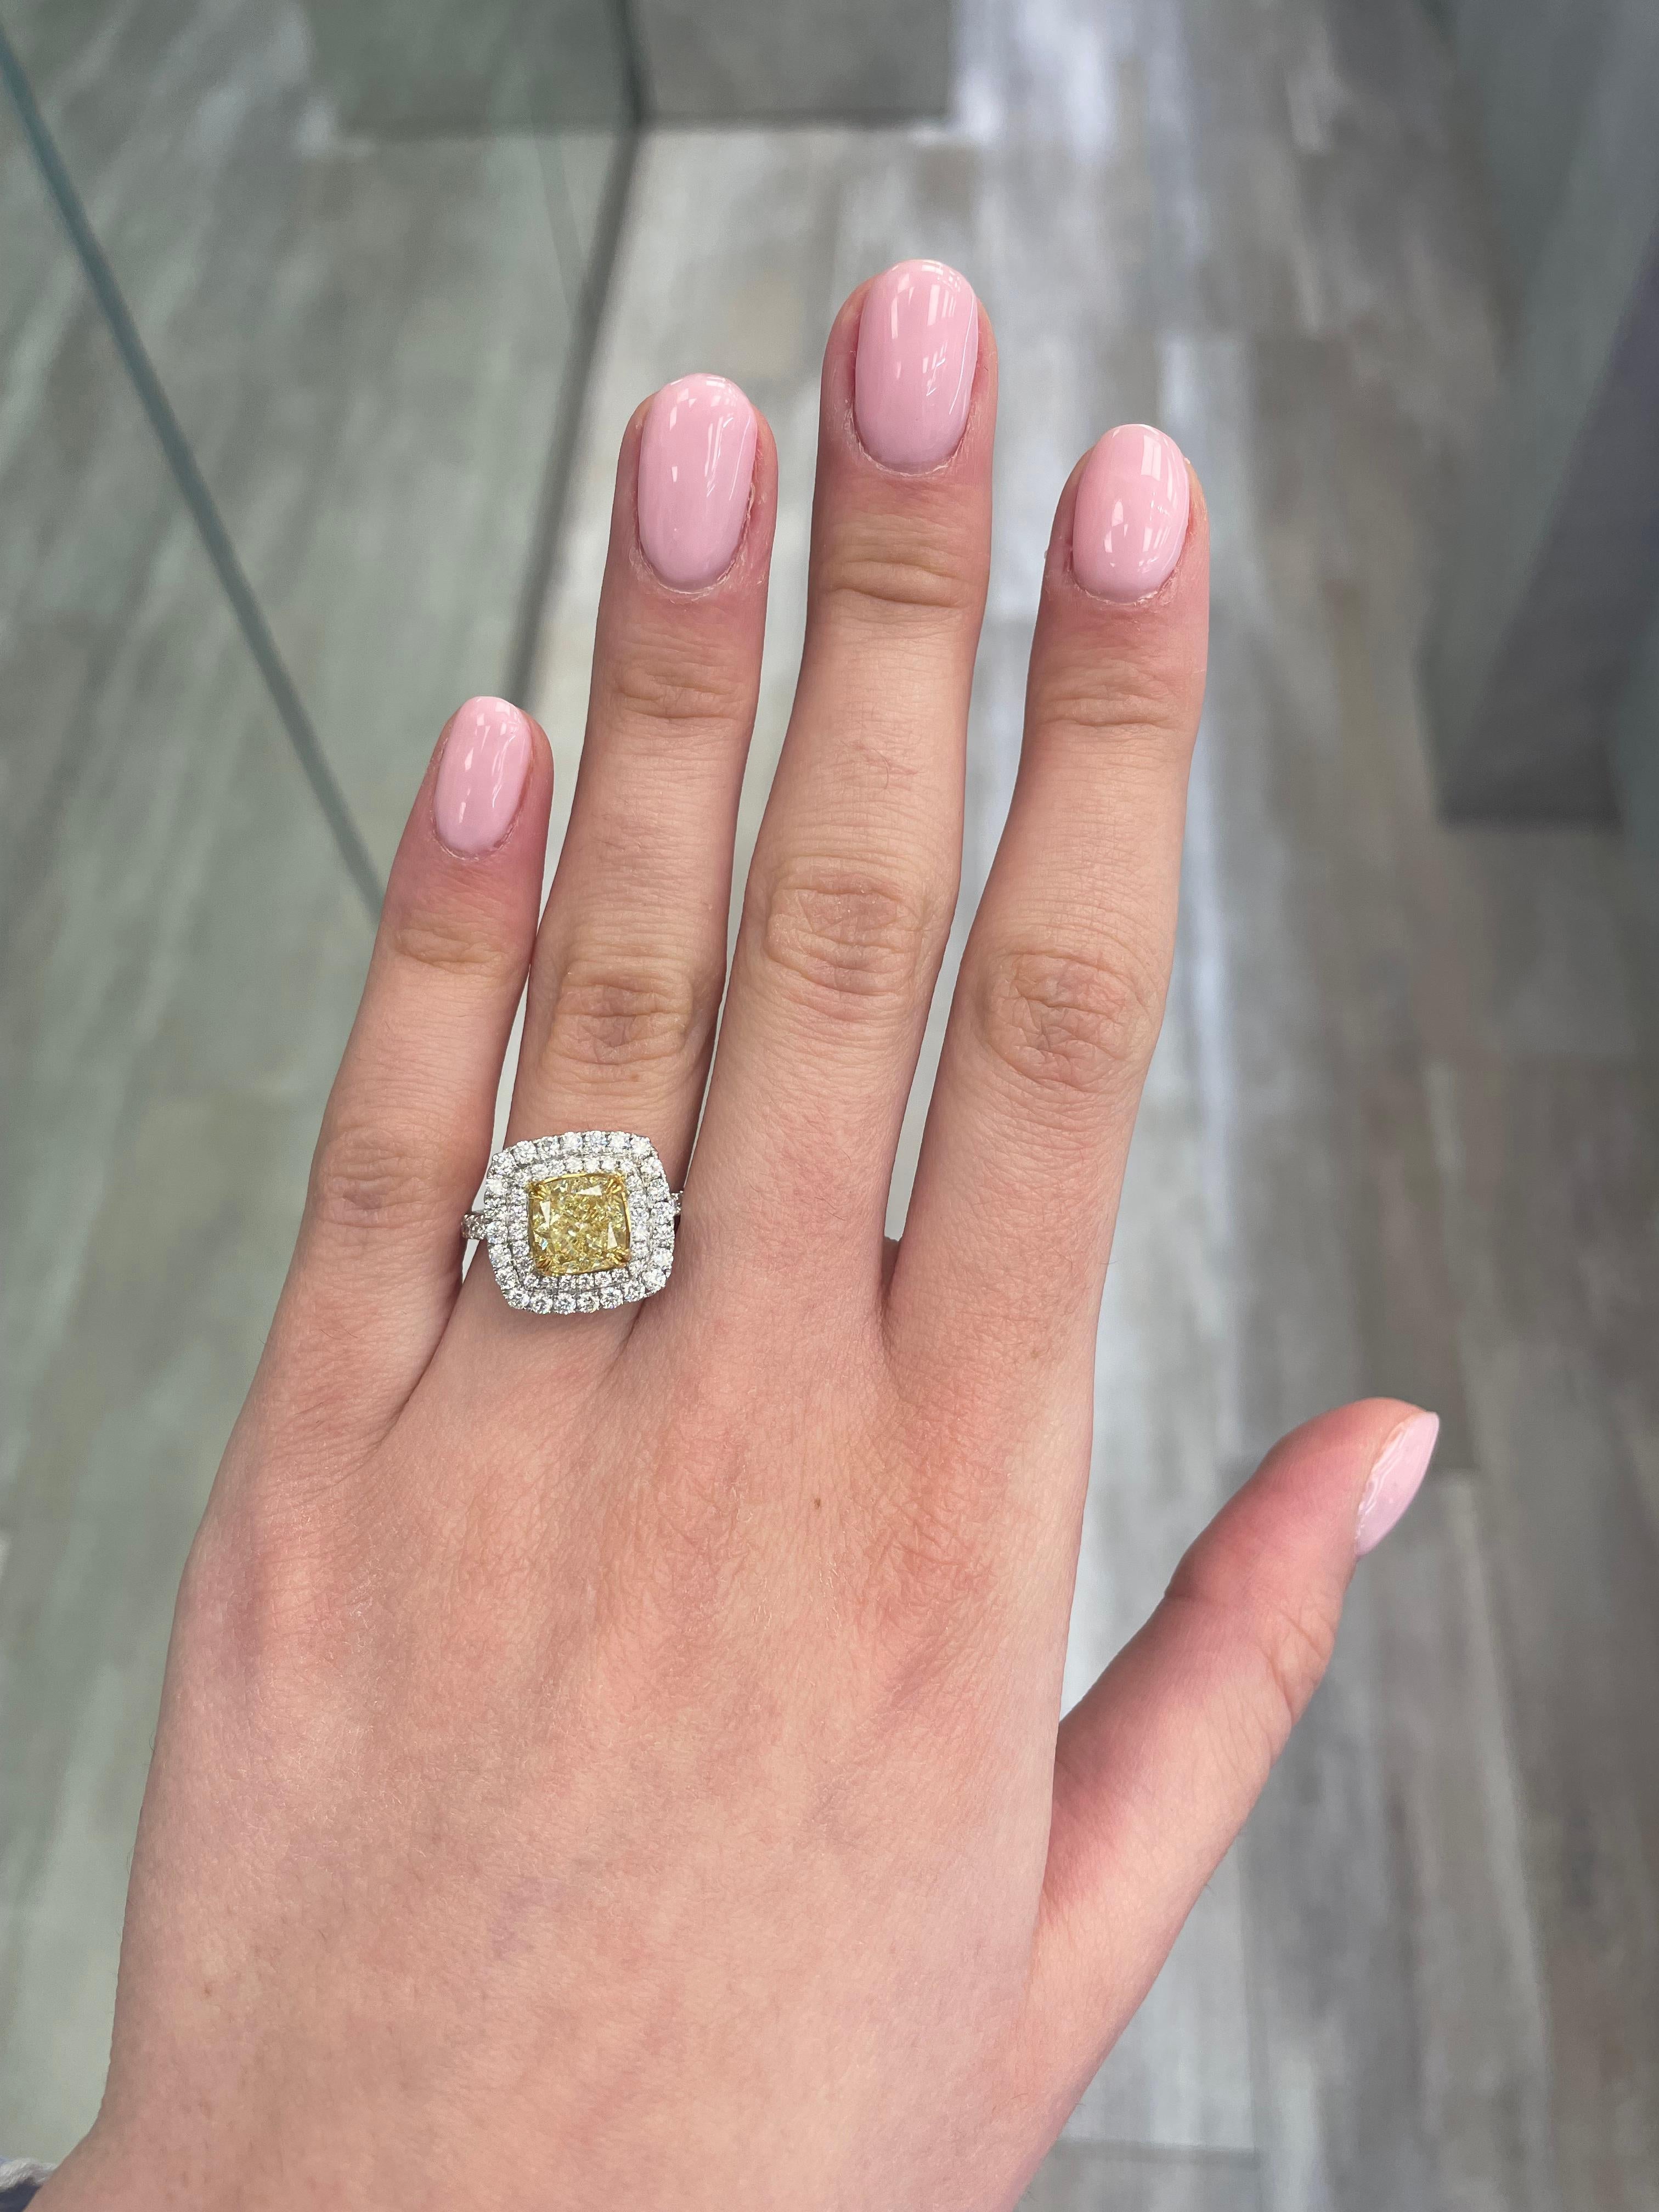 Stunning modern EGL certified yellow diamond double halo ring, two-tone 18k yellow and white gold. By Alexander Beverly Hills
2.29 carats total diamond weight.
1.52 carat cushion cut Fancy Yellow color and VS2 clarity diamond, EGL graded.